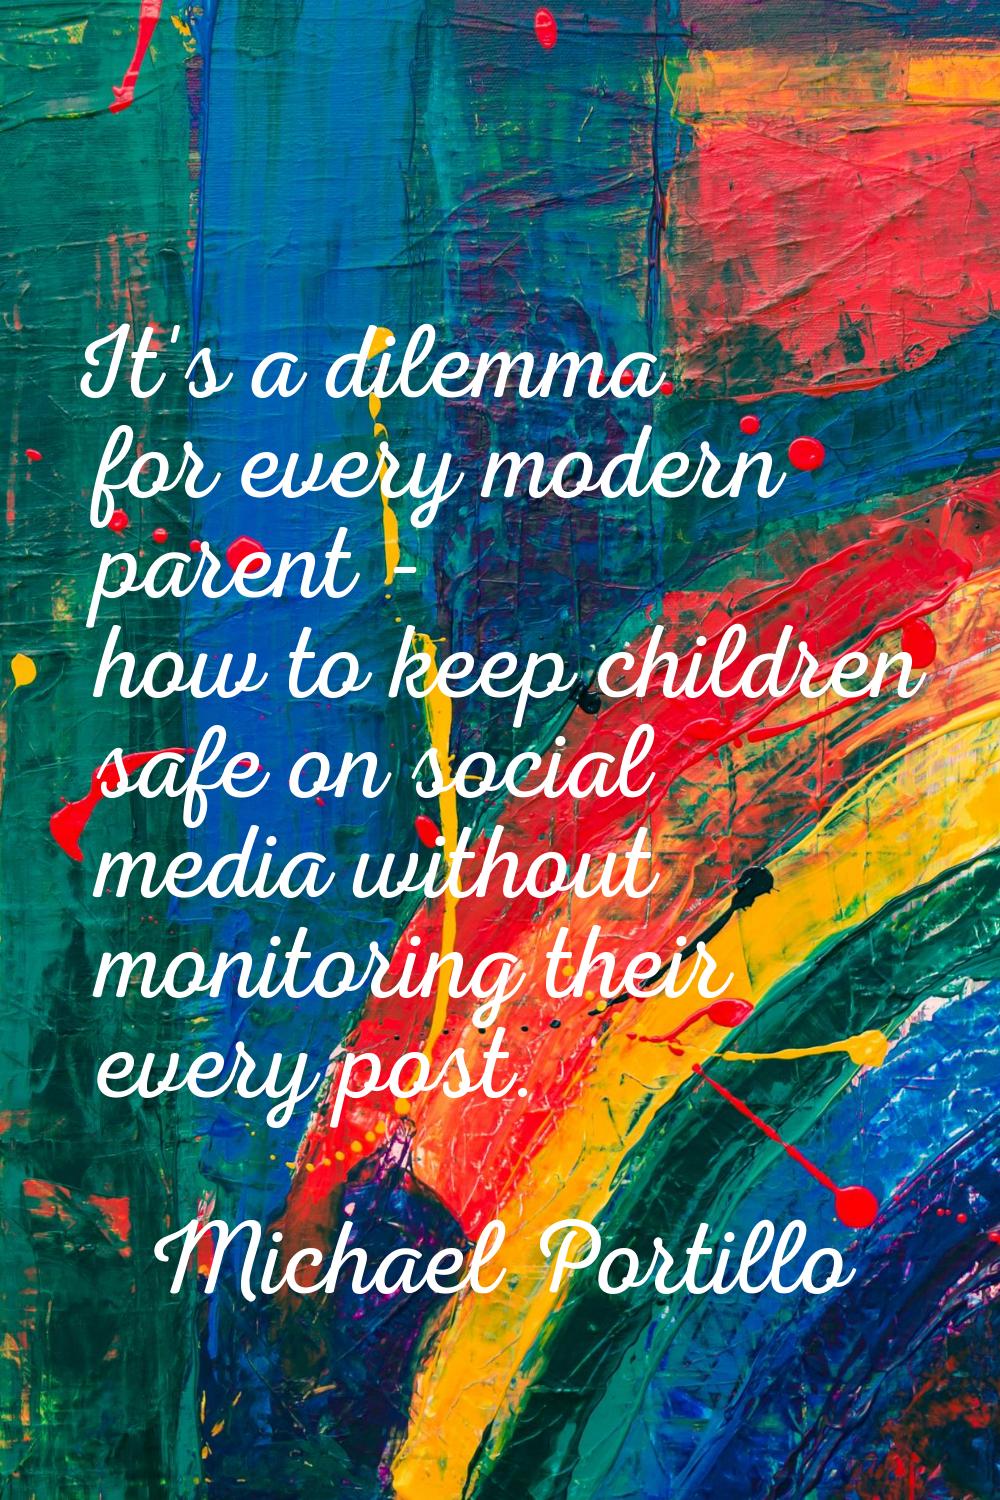 It's a dilemma for every modern parent - how to keep children safe on social media without monitori